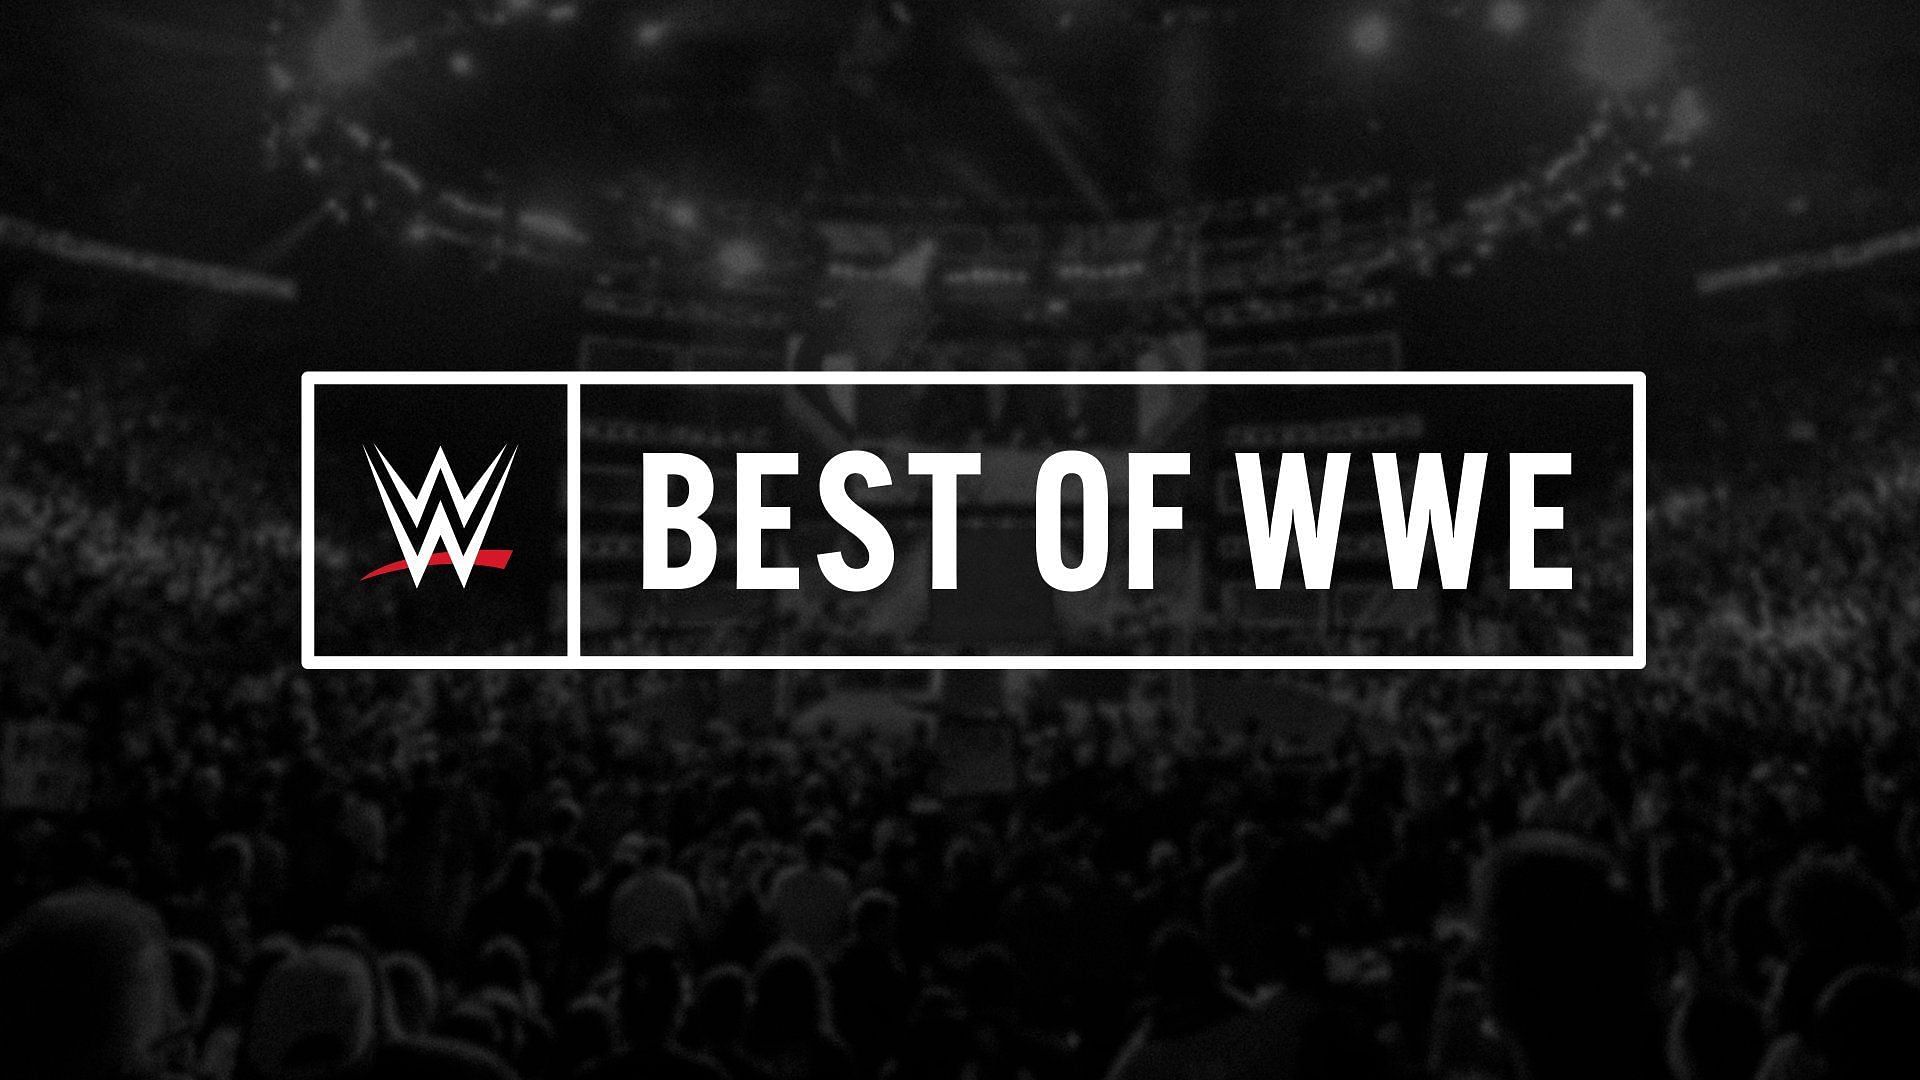 The Best of WWE graphic